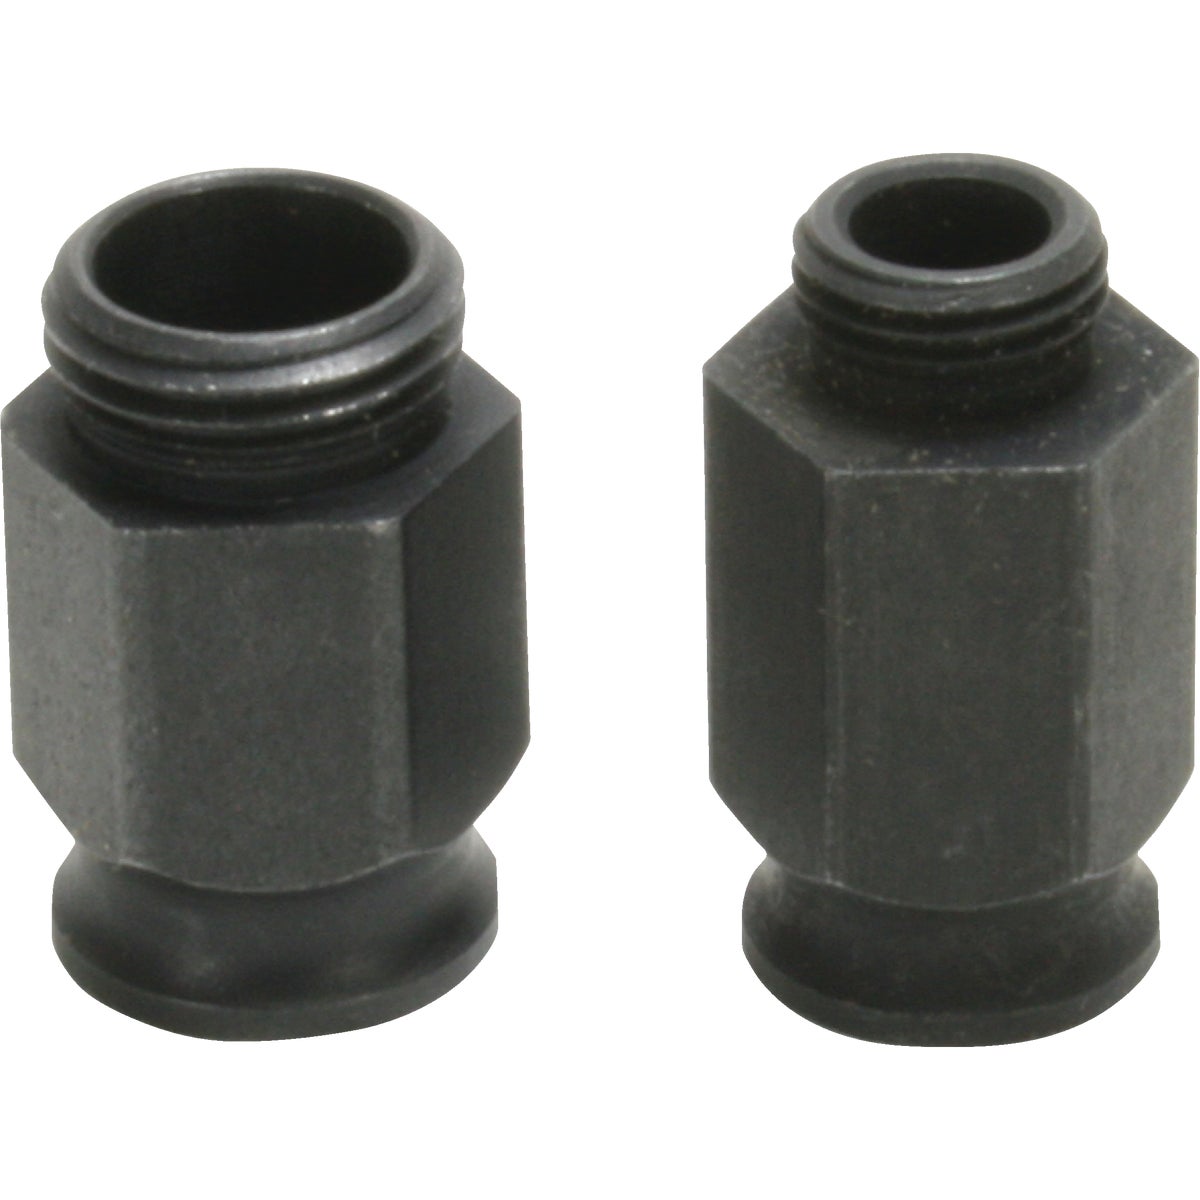 Diablo 1/2 In. and 5/8 In. Mandrel Adapter Nuts for 9/16 In. to 6 In. Hole Saws (2-Pack)